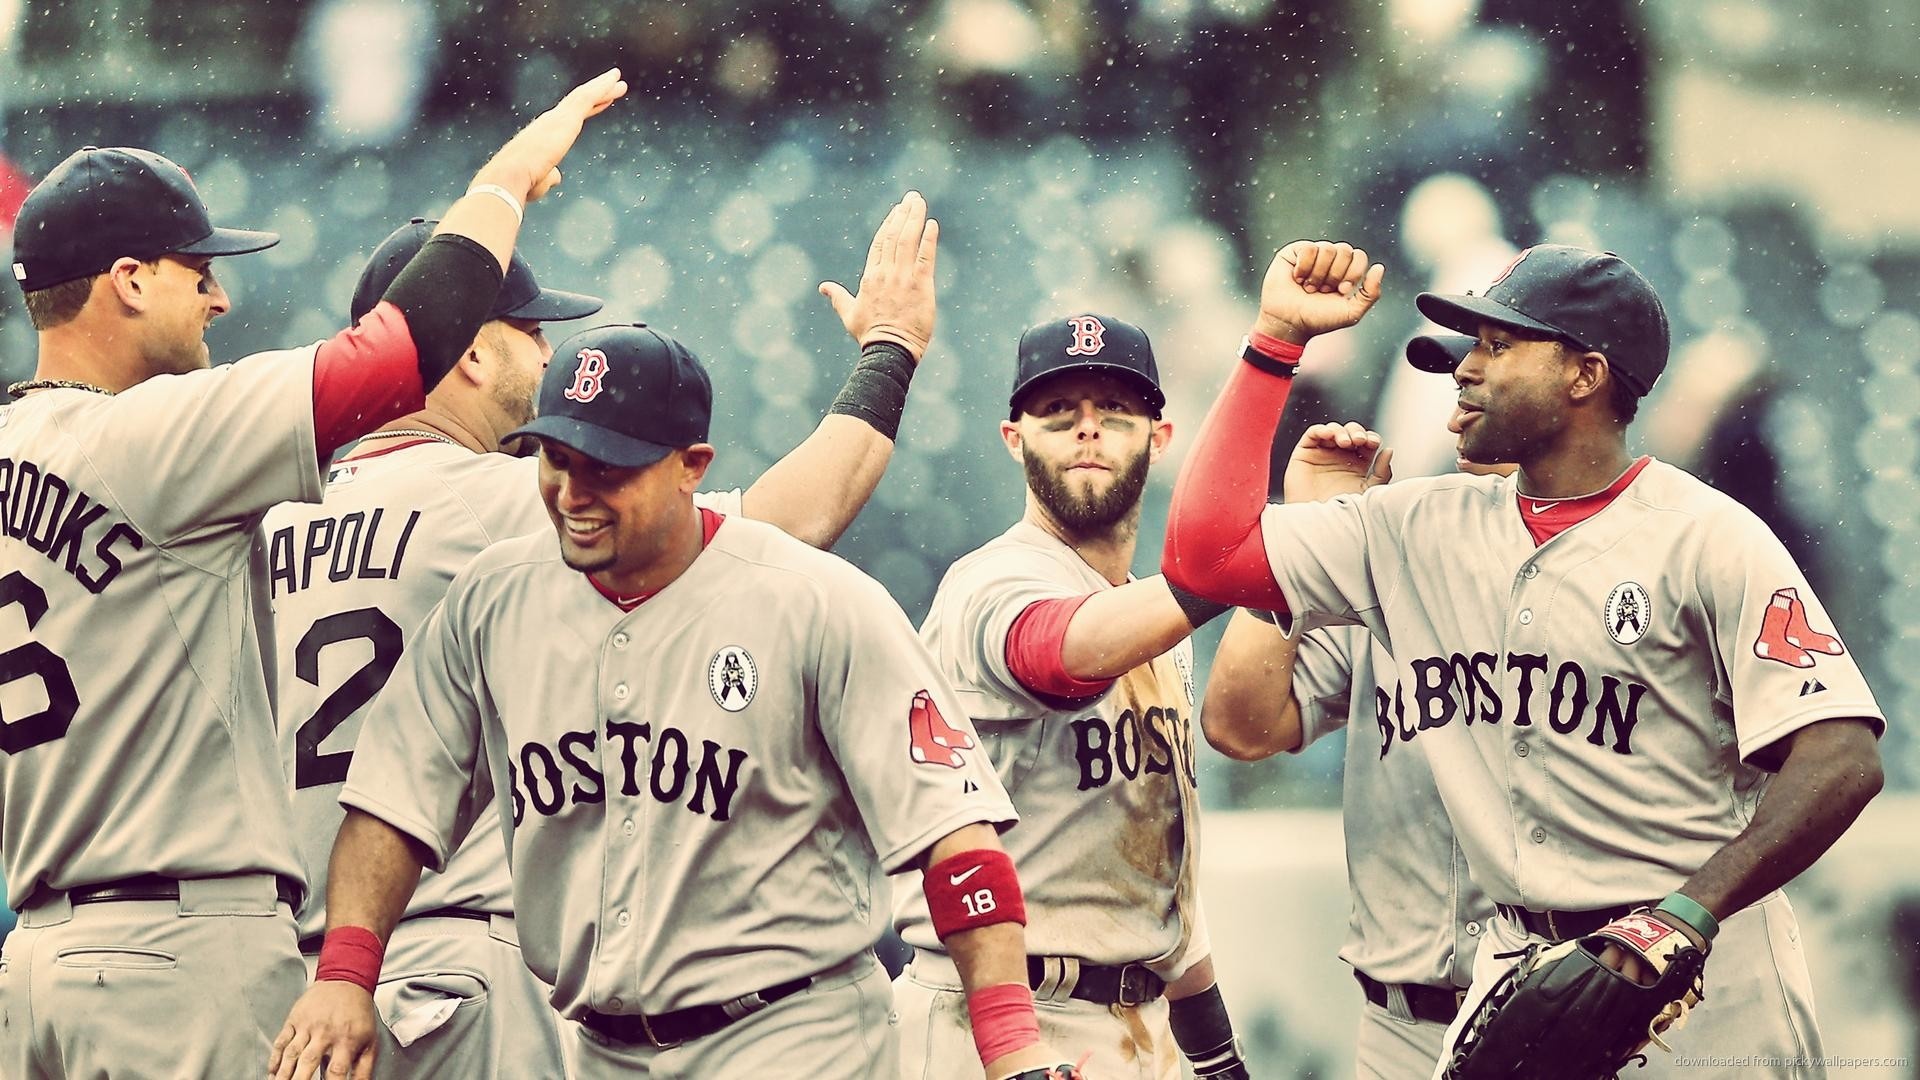 Boston Red Sox: The winner of nine World Series titles and 14 American League pennants. 1920x1080 Full HD Wallpaper.